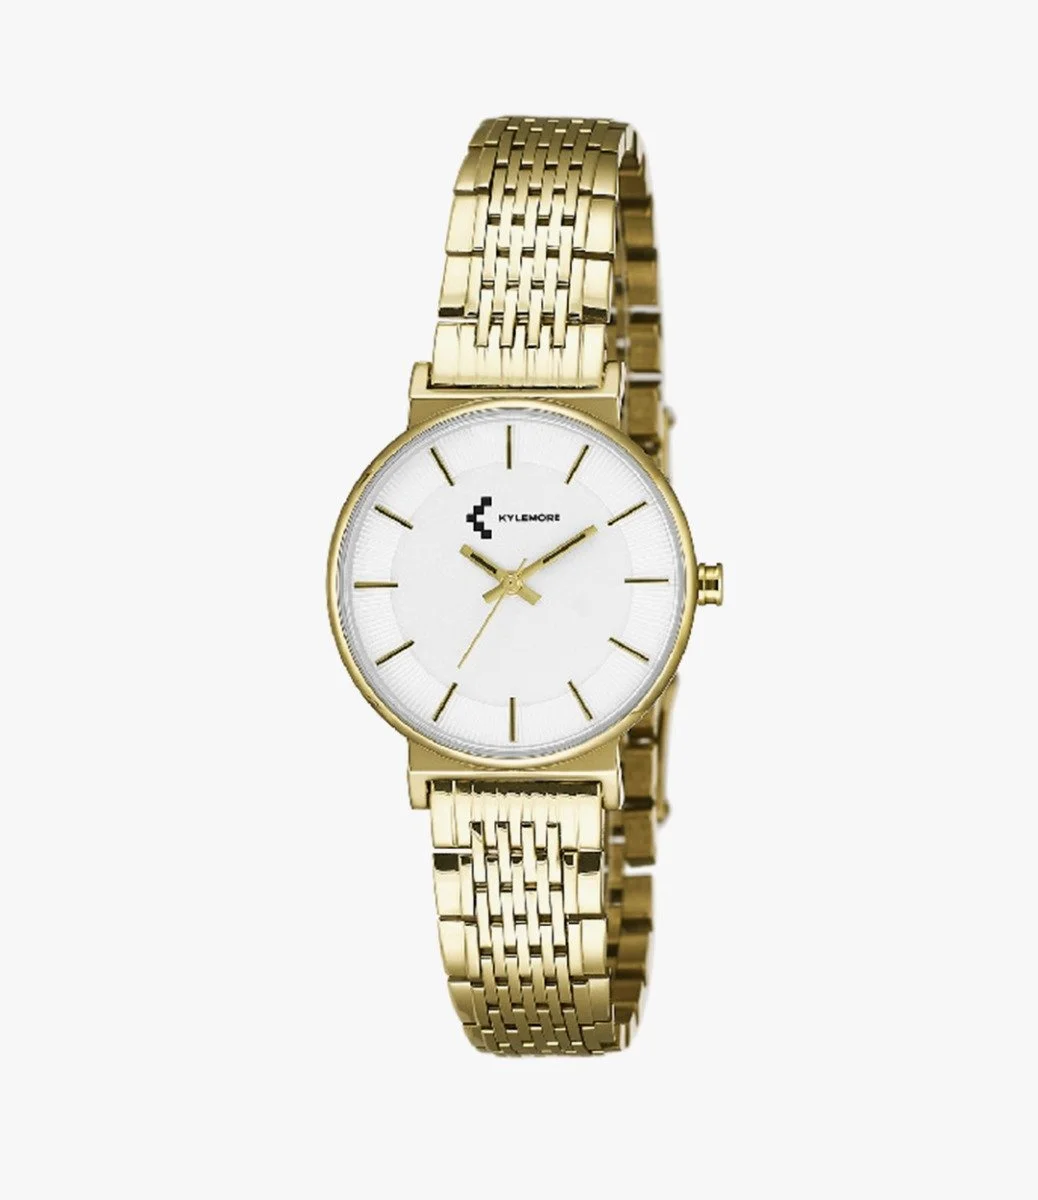 The Goldy Kylemore Watch